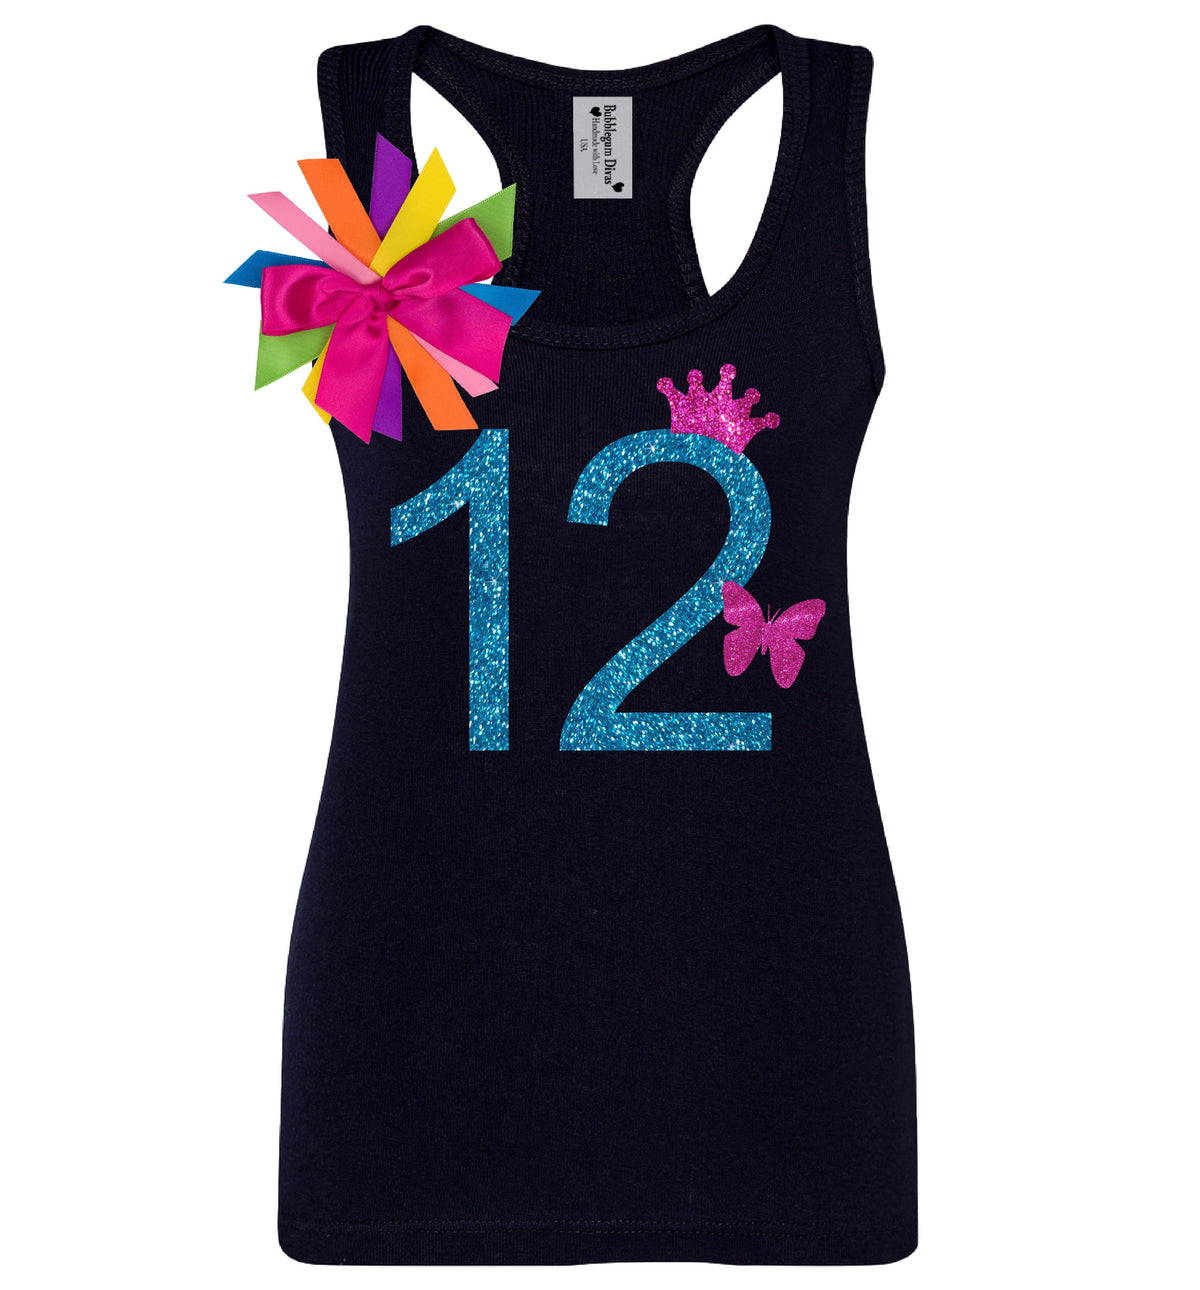 Black Butterfly Tank Top 12 with rainbow ribbons